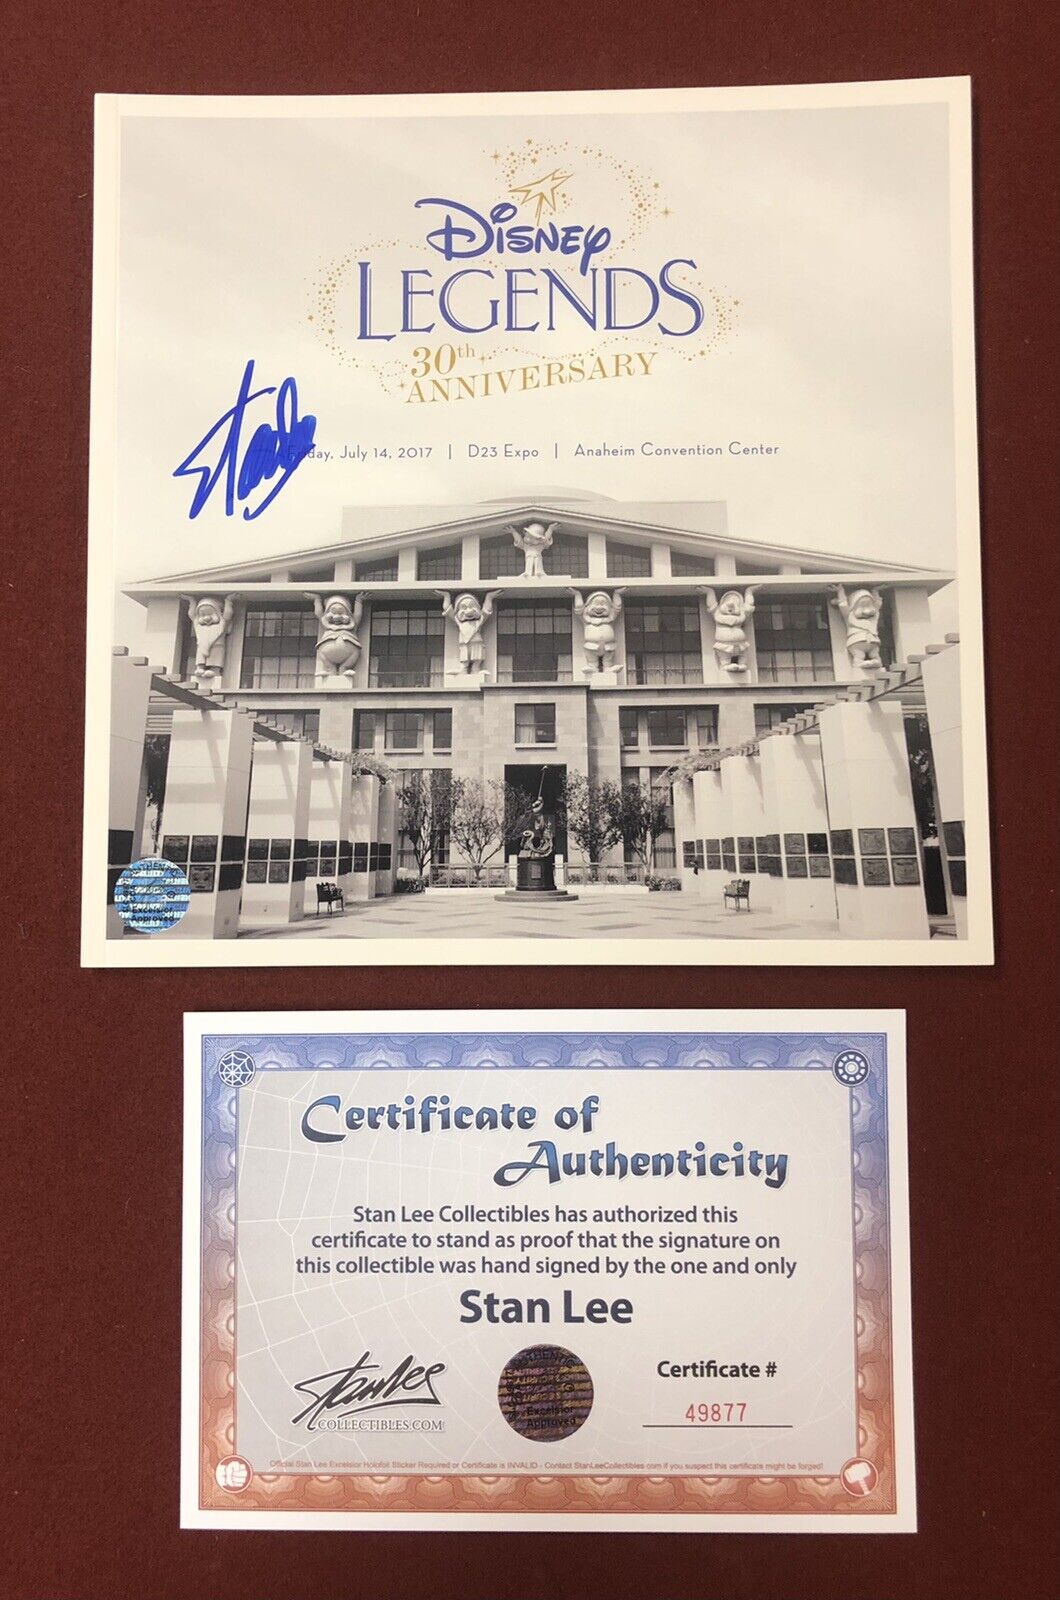 Disney Legends 30th Anniversary D23 Expo 2017 Booklet Signed by Stan Lee w/ COA